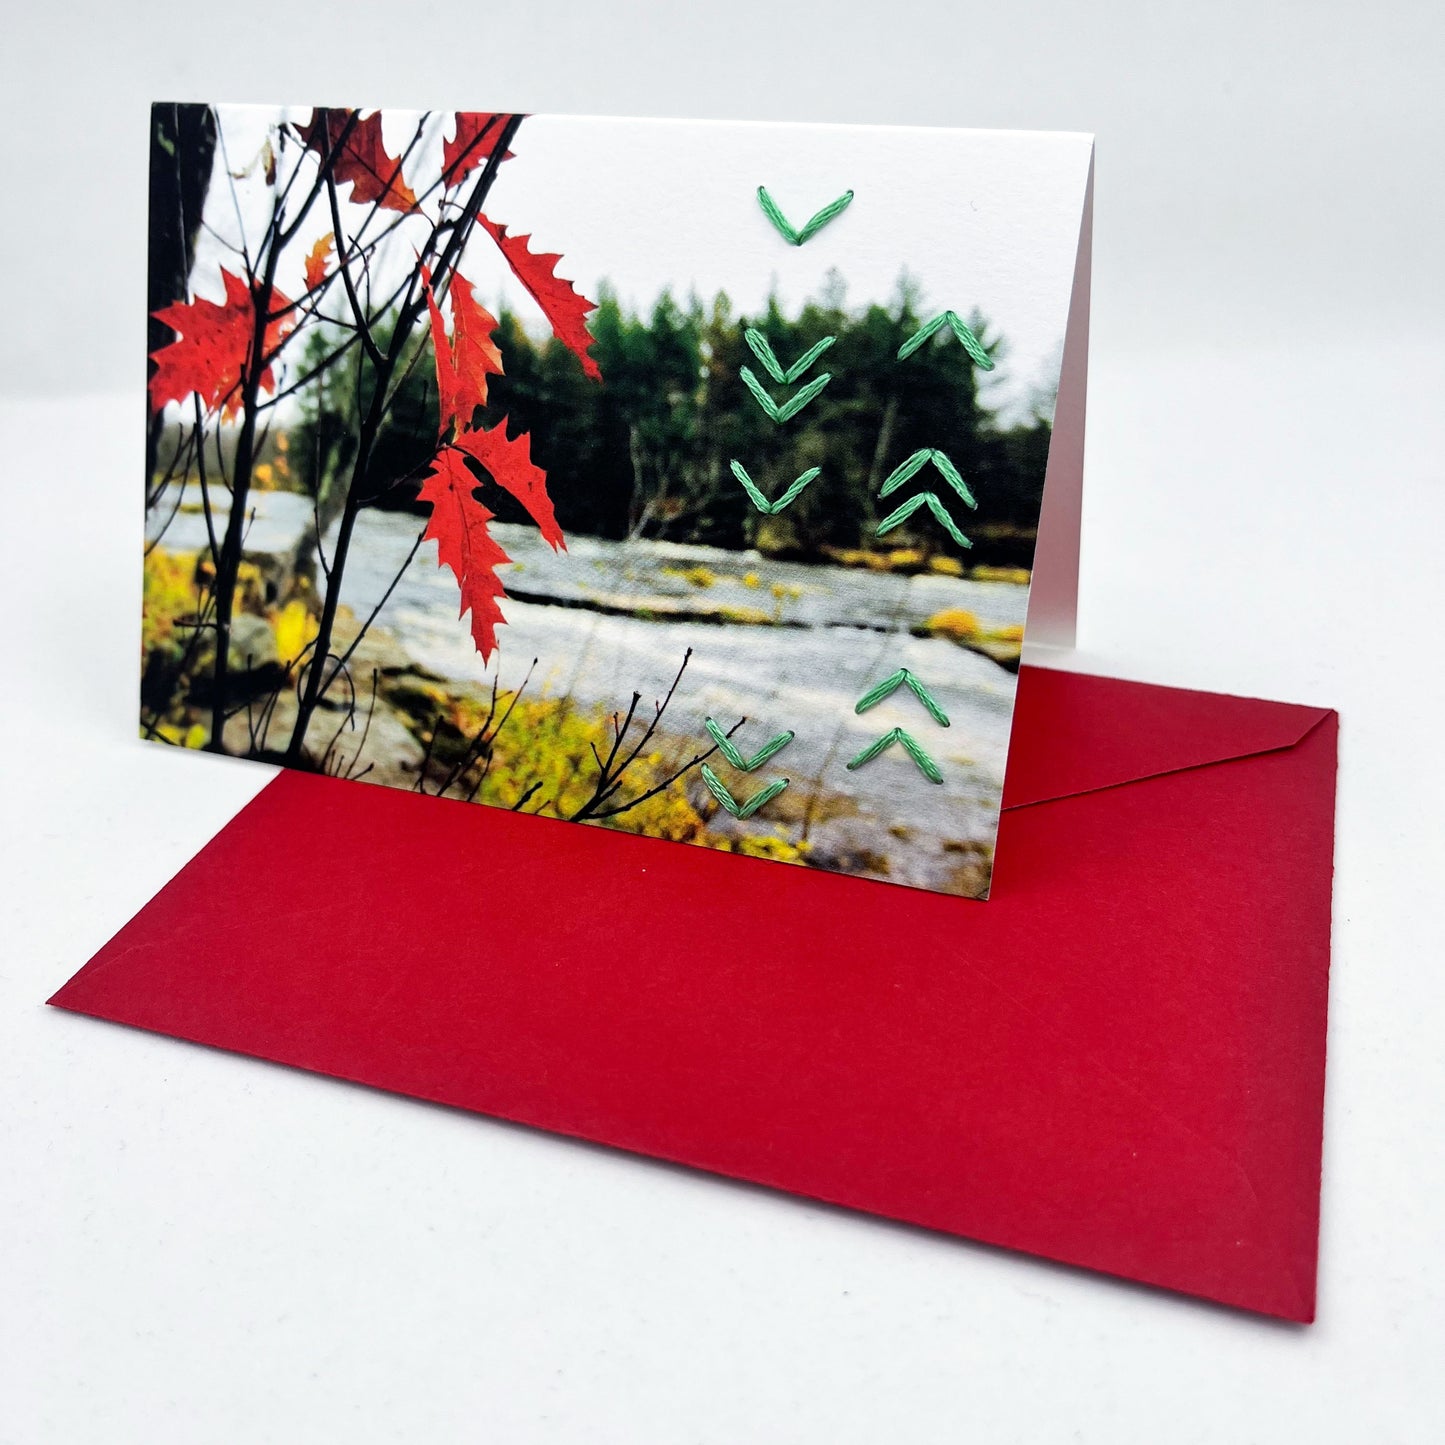 Greeting card standing upright on an envelope. Photo of red leaves. Rows of green chevron stitches along right side card